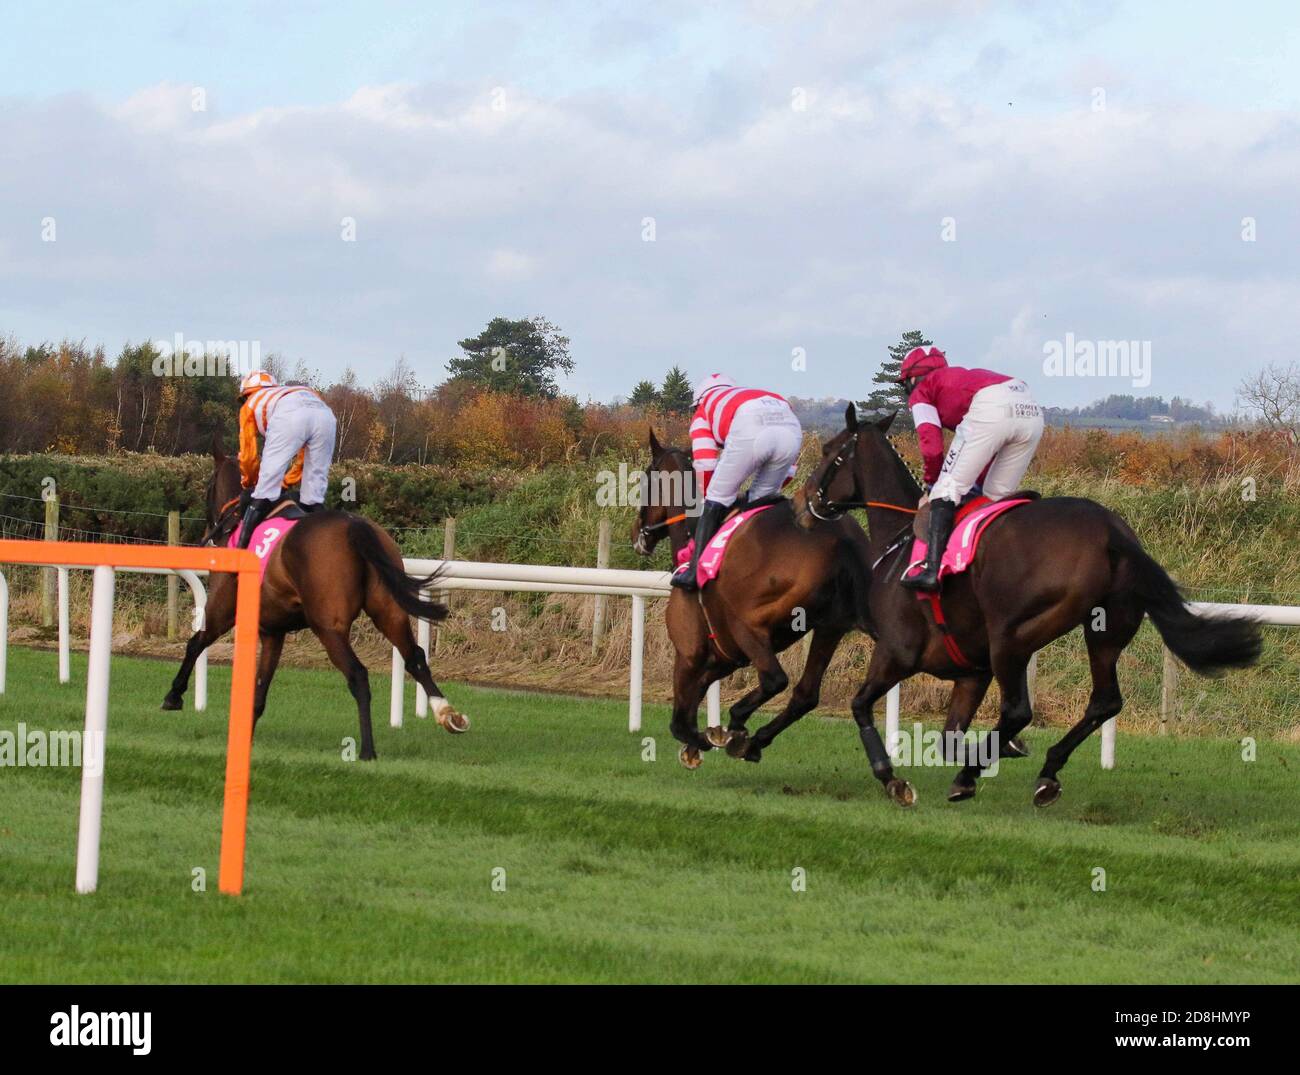 Down Royal Racecourse, Lisburn, Northern Ireland. 30 Oct 2020. The Ladbrokes Festival of Racing (Day 1) got underway today.The feature race of the day was the WKD Hurdle (Grade 2) with just under £36,000 for the winner. The race was won by Aspire Tower (3 – orange top) ridden by Rachael Blackmore and trained by H de Bromhead. Credit: CAZIMB/Alamy Live News. Stock Photo